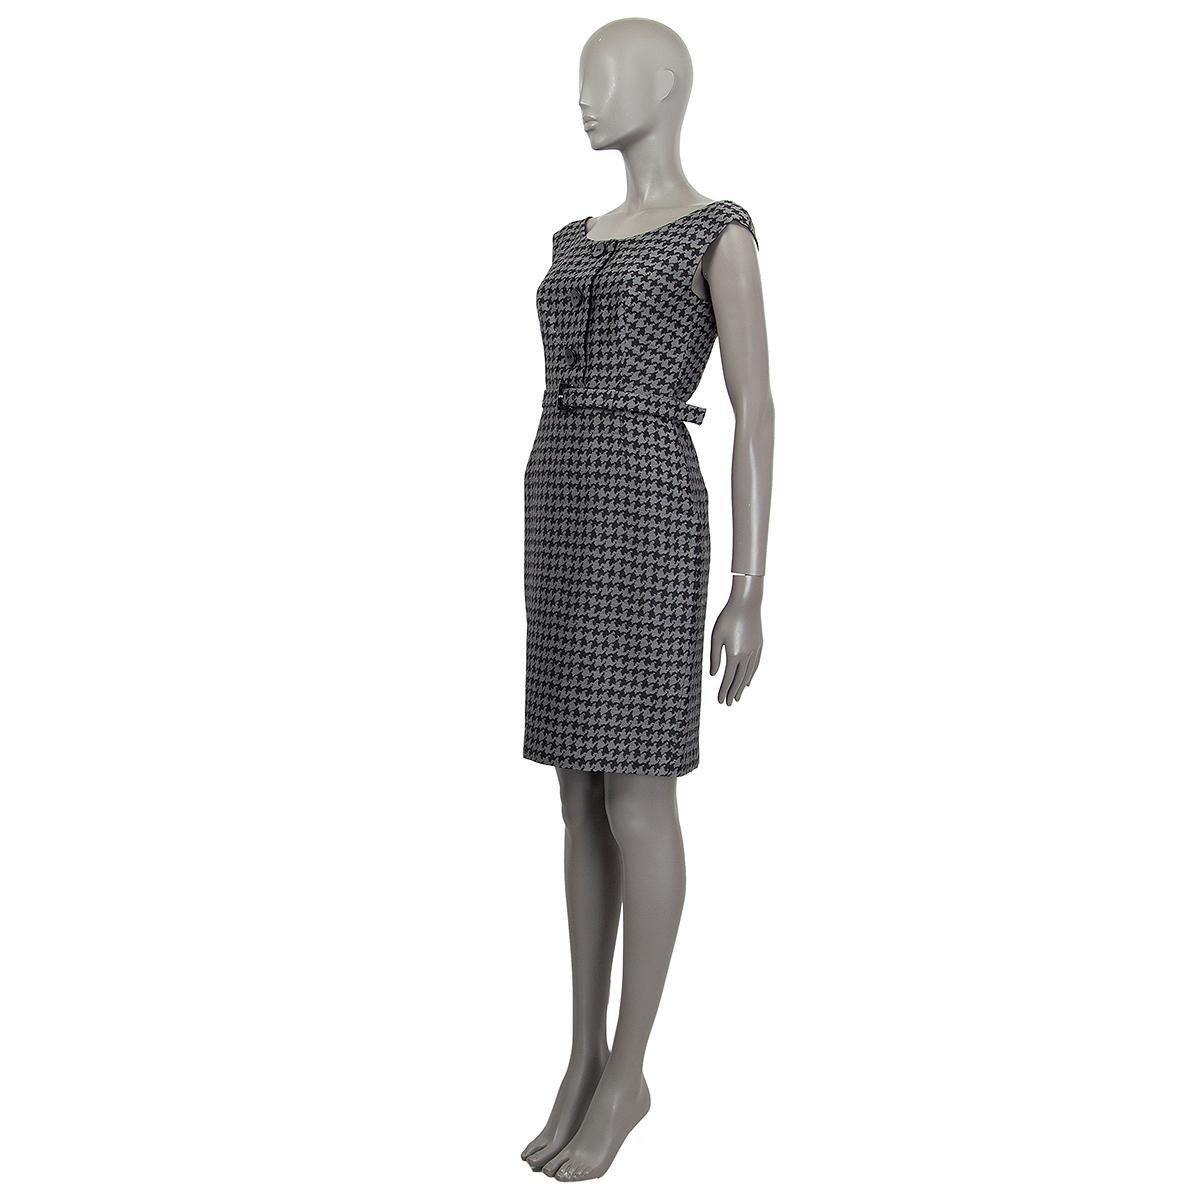 100% authentic Prada houdstooth sleeveless belted dress in grey and black wool (with 14% silk) with three black bottons. Opens with a concealed zipper in the back. Lined in viscose (66%) and silk (34%). Has been worn and with a minor chip on the top